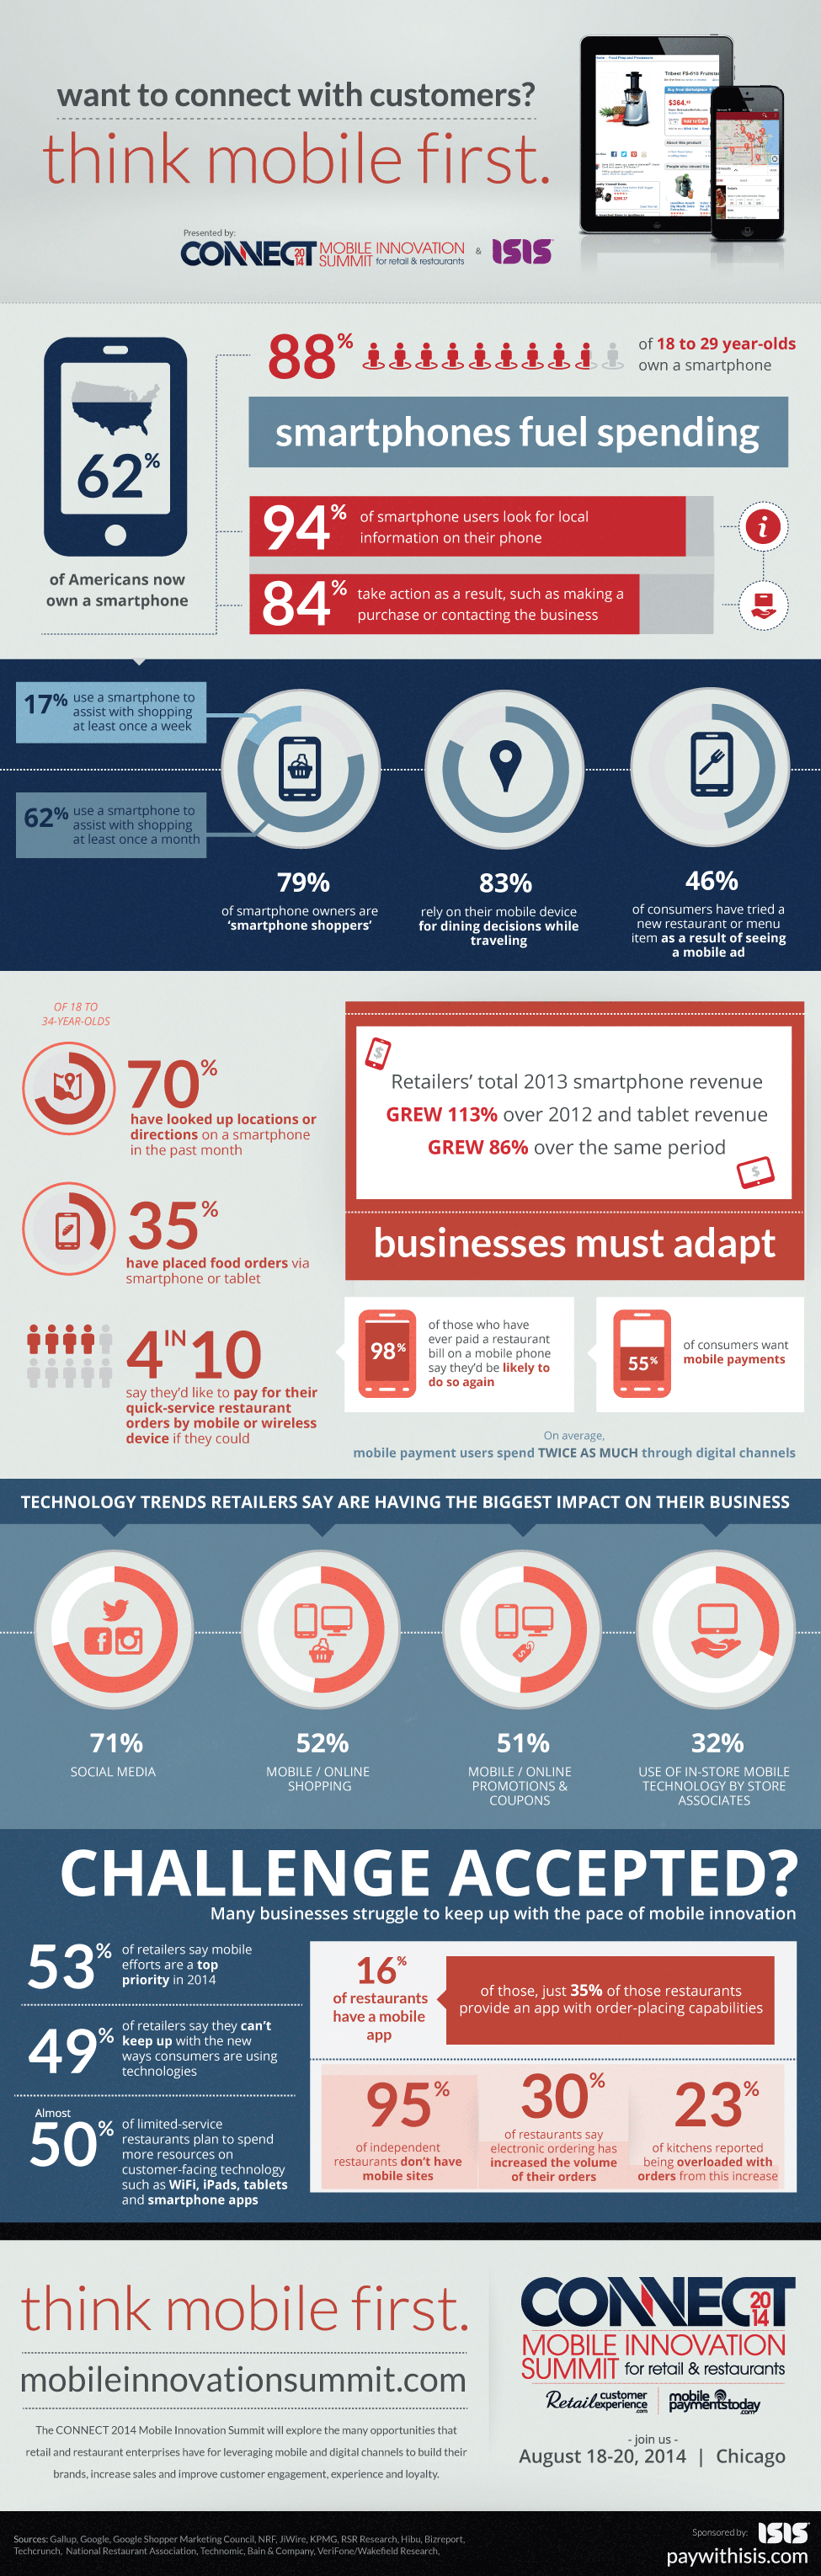 Want to connect with customers? Think mobile first. [infographic]